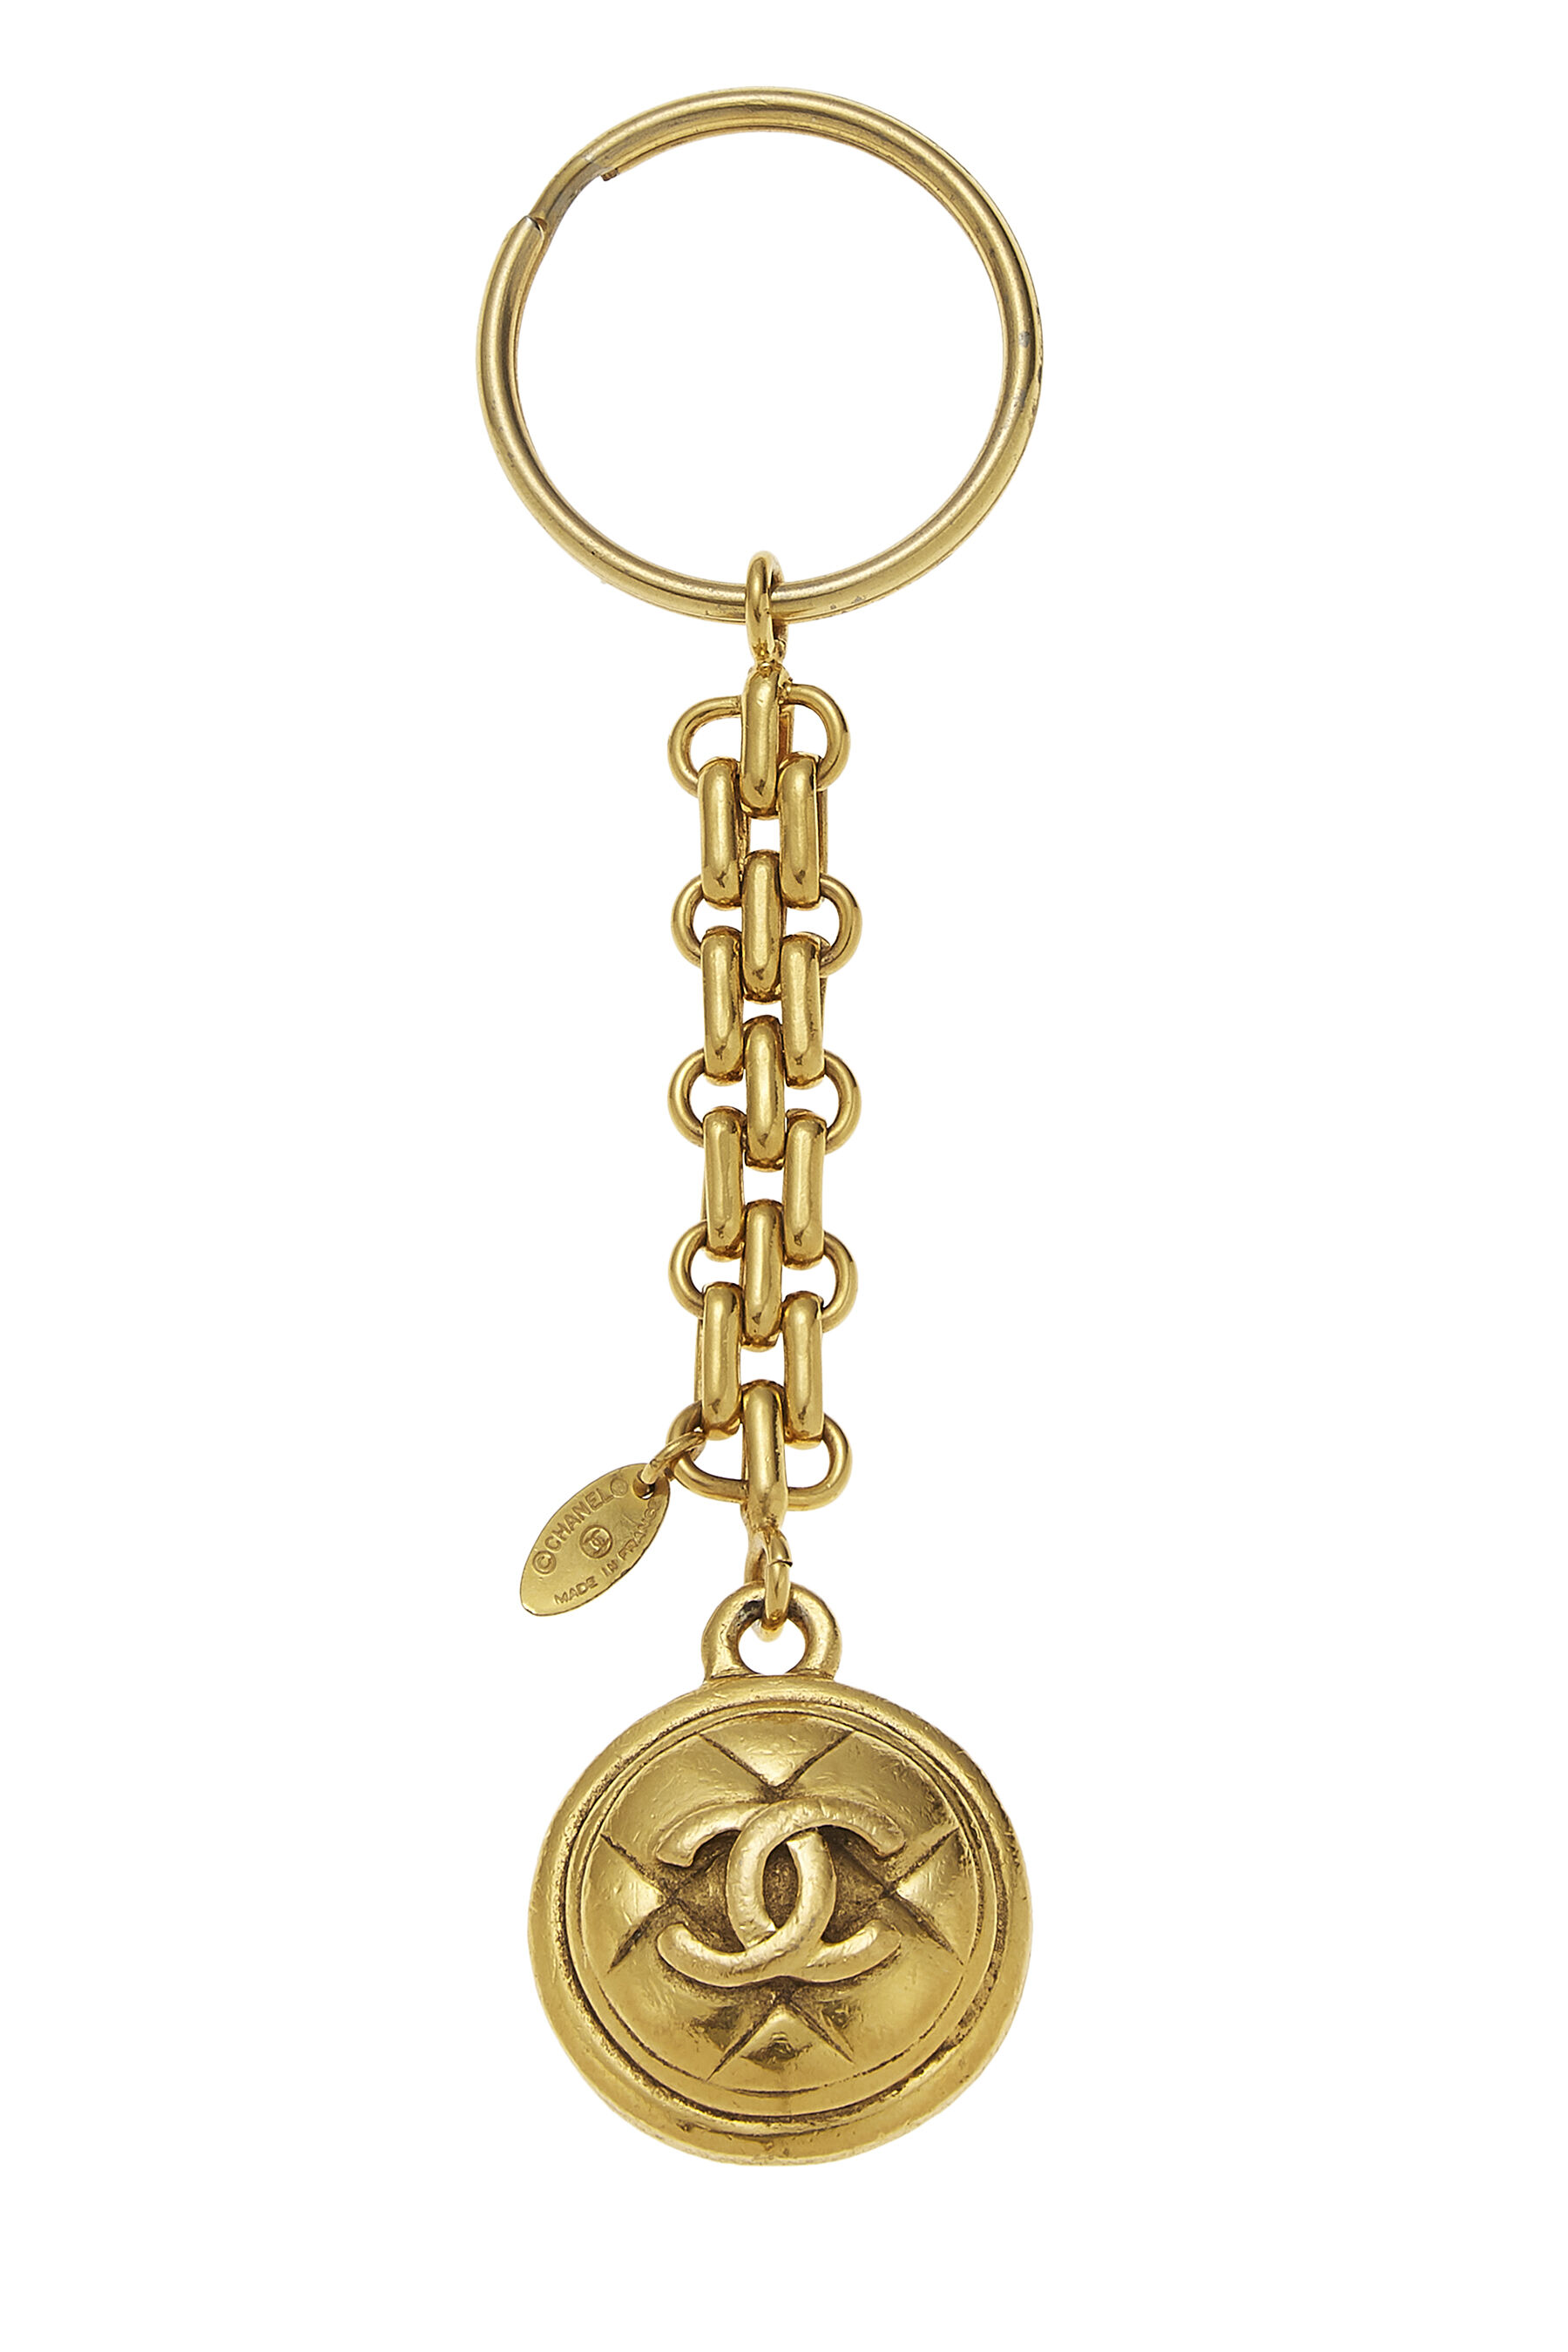 CHANEL Coco Chanel CC Coins Key Chain Light Gold 39785